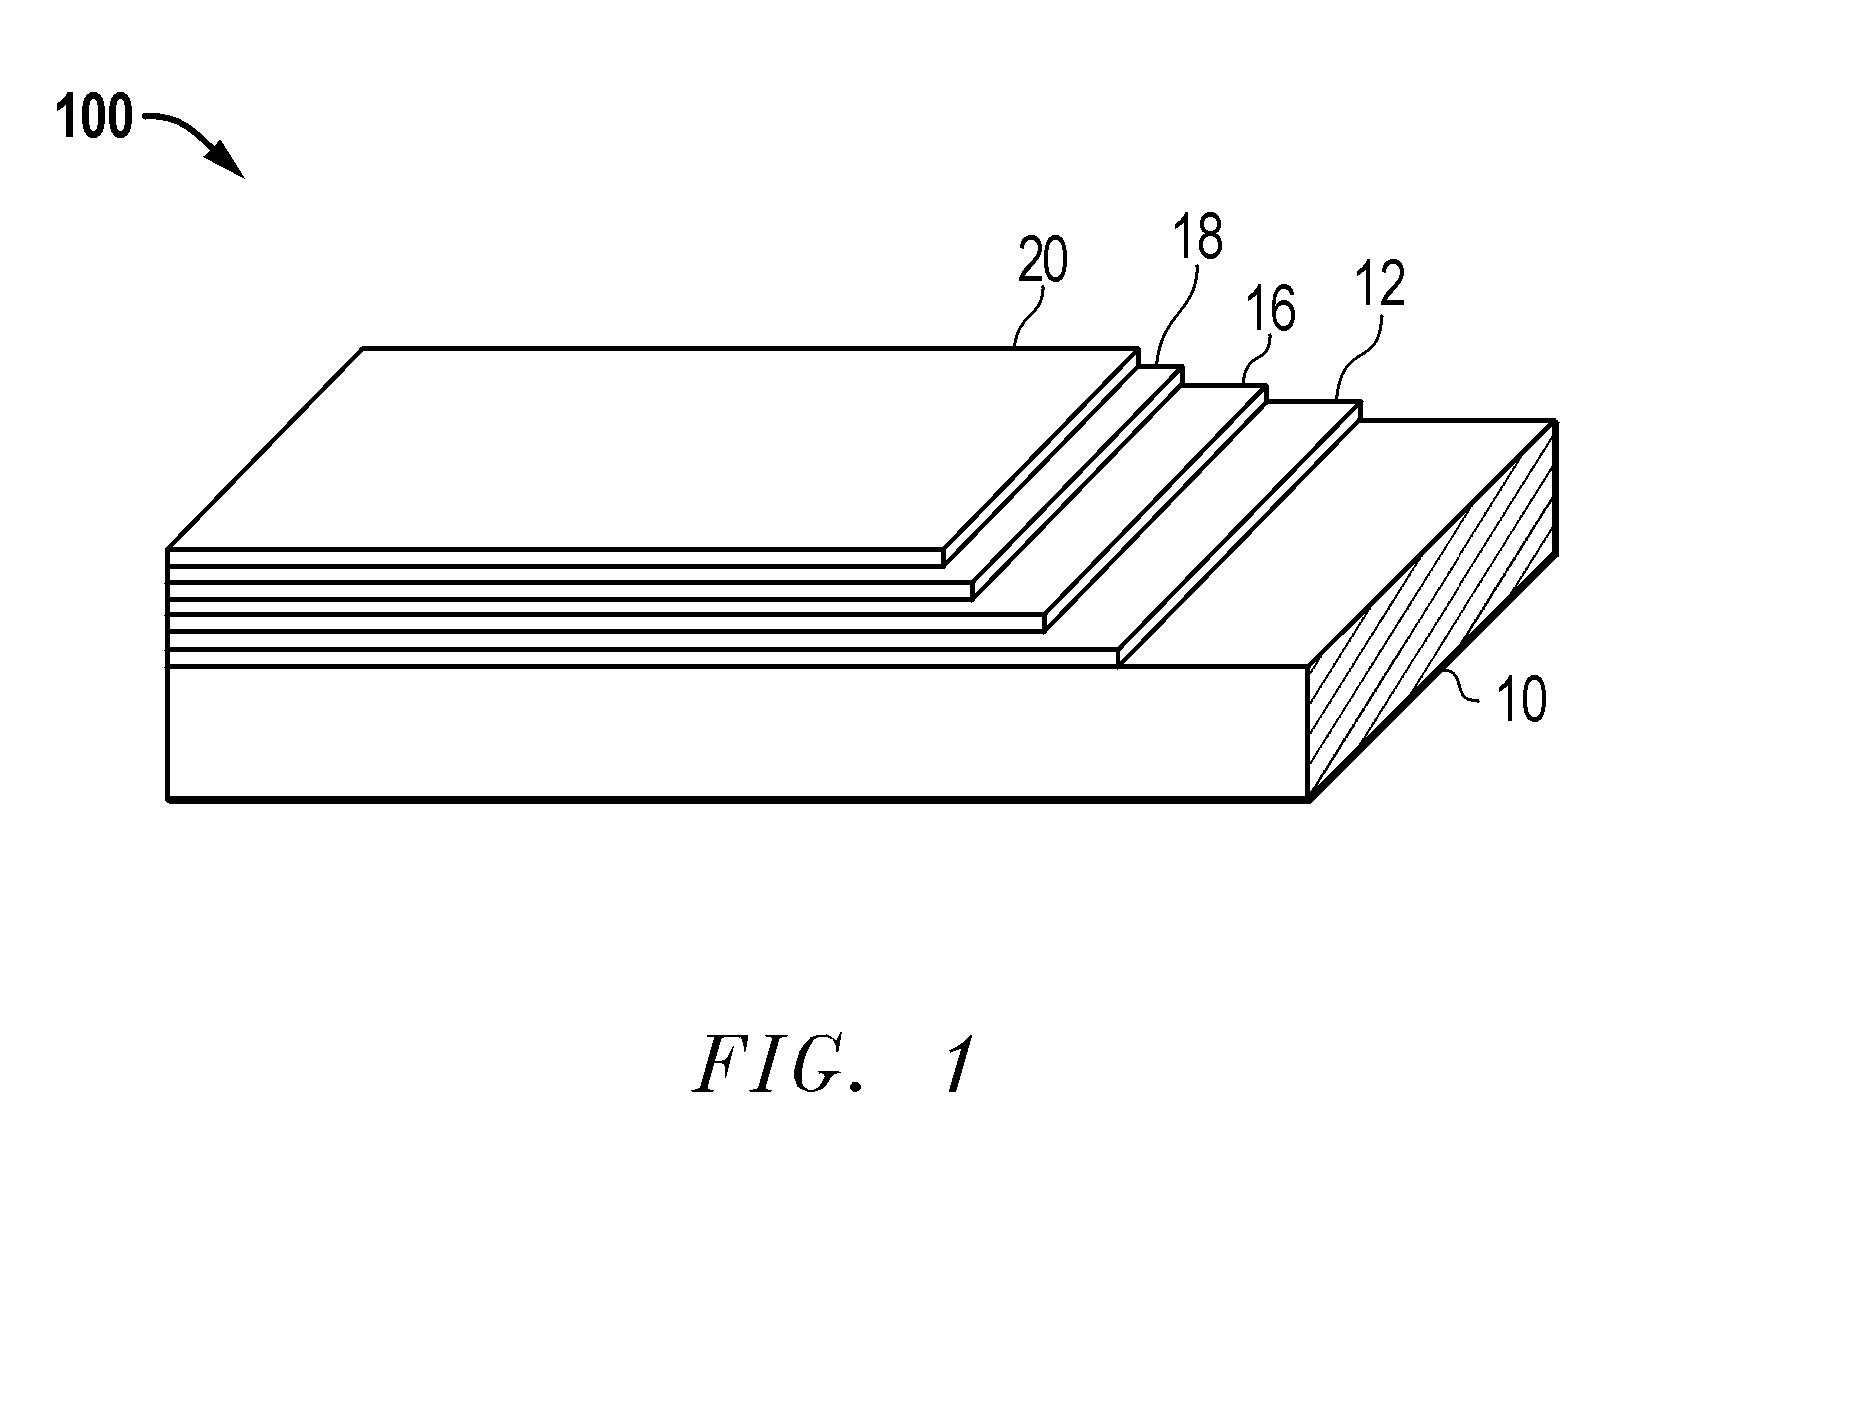 Superconducting article and method of making